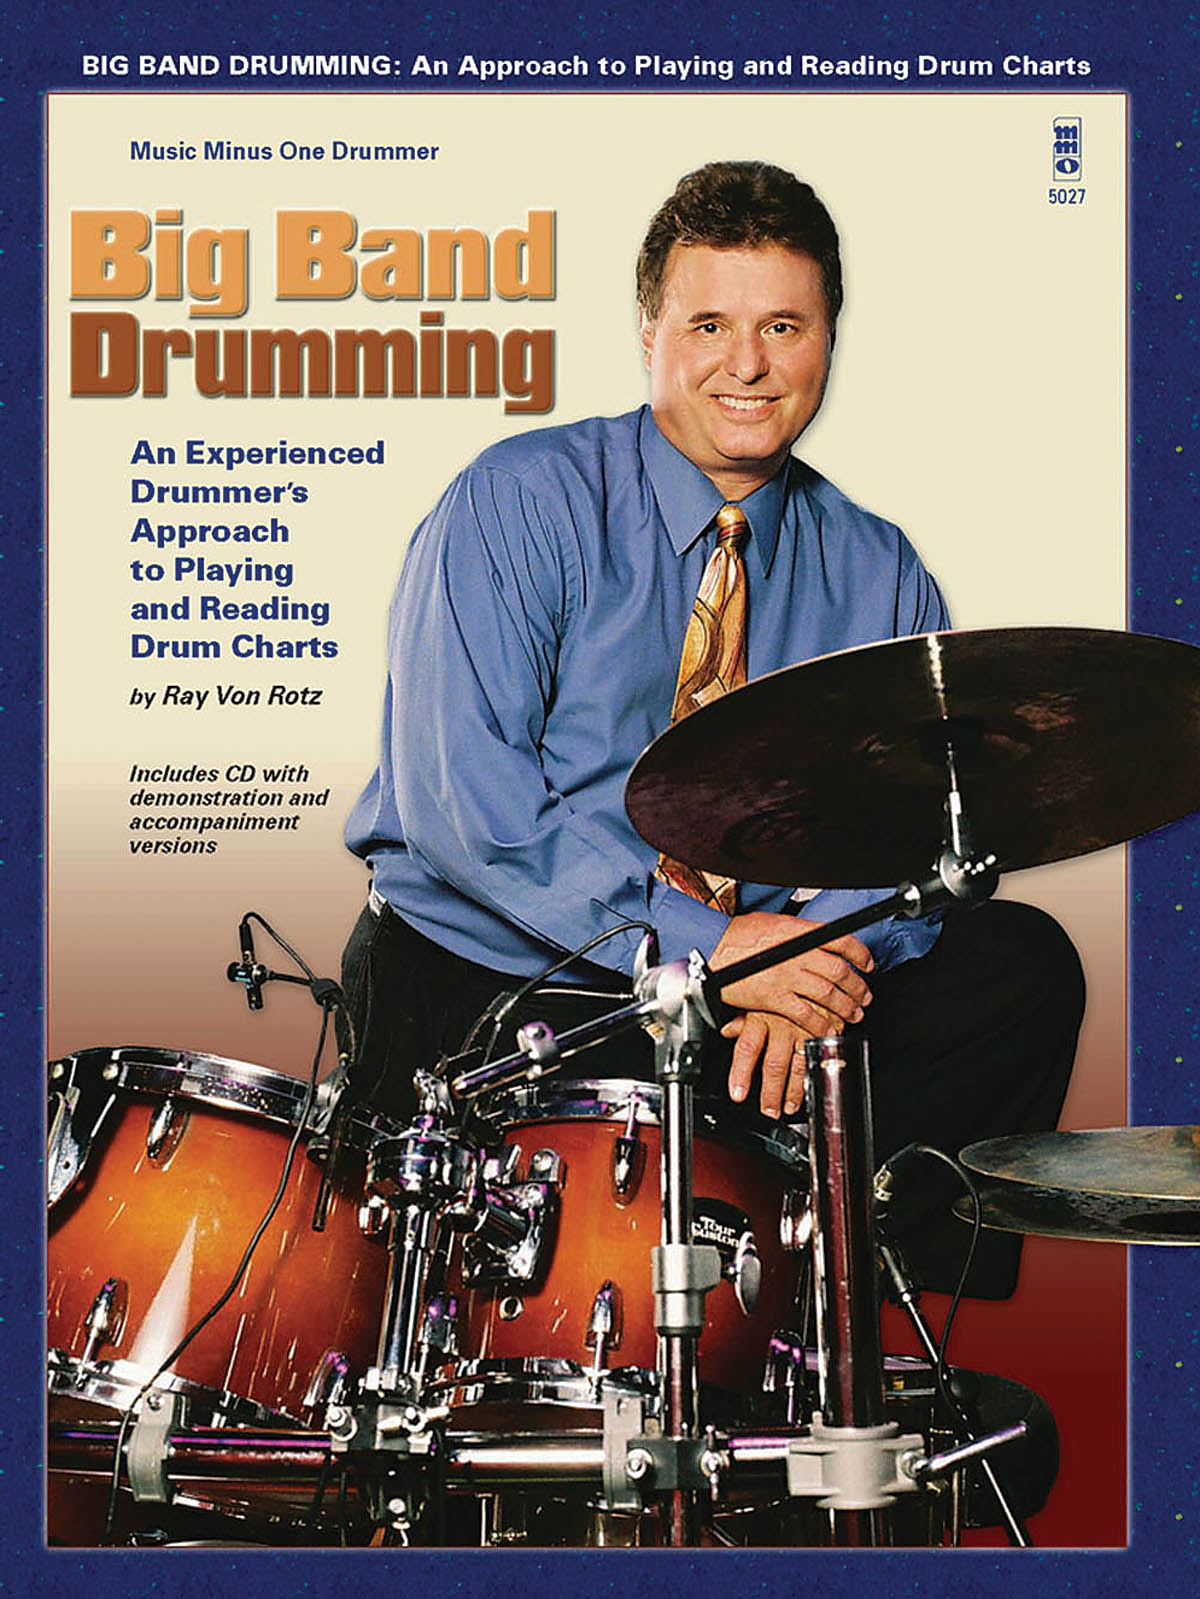 Big Band Drumming - An Experienced Drummer's Approach to Playing and Reading Drum Charts - noty na bicí